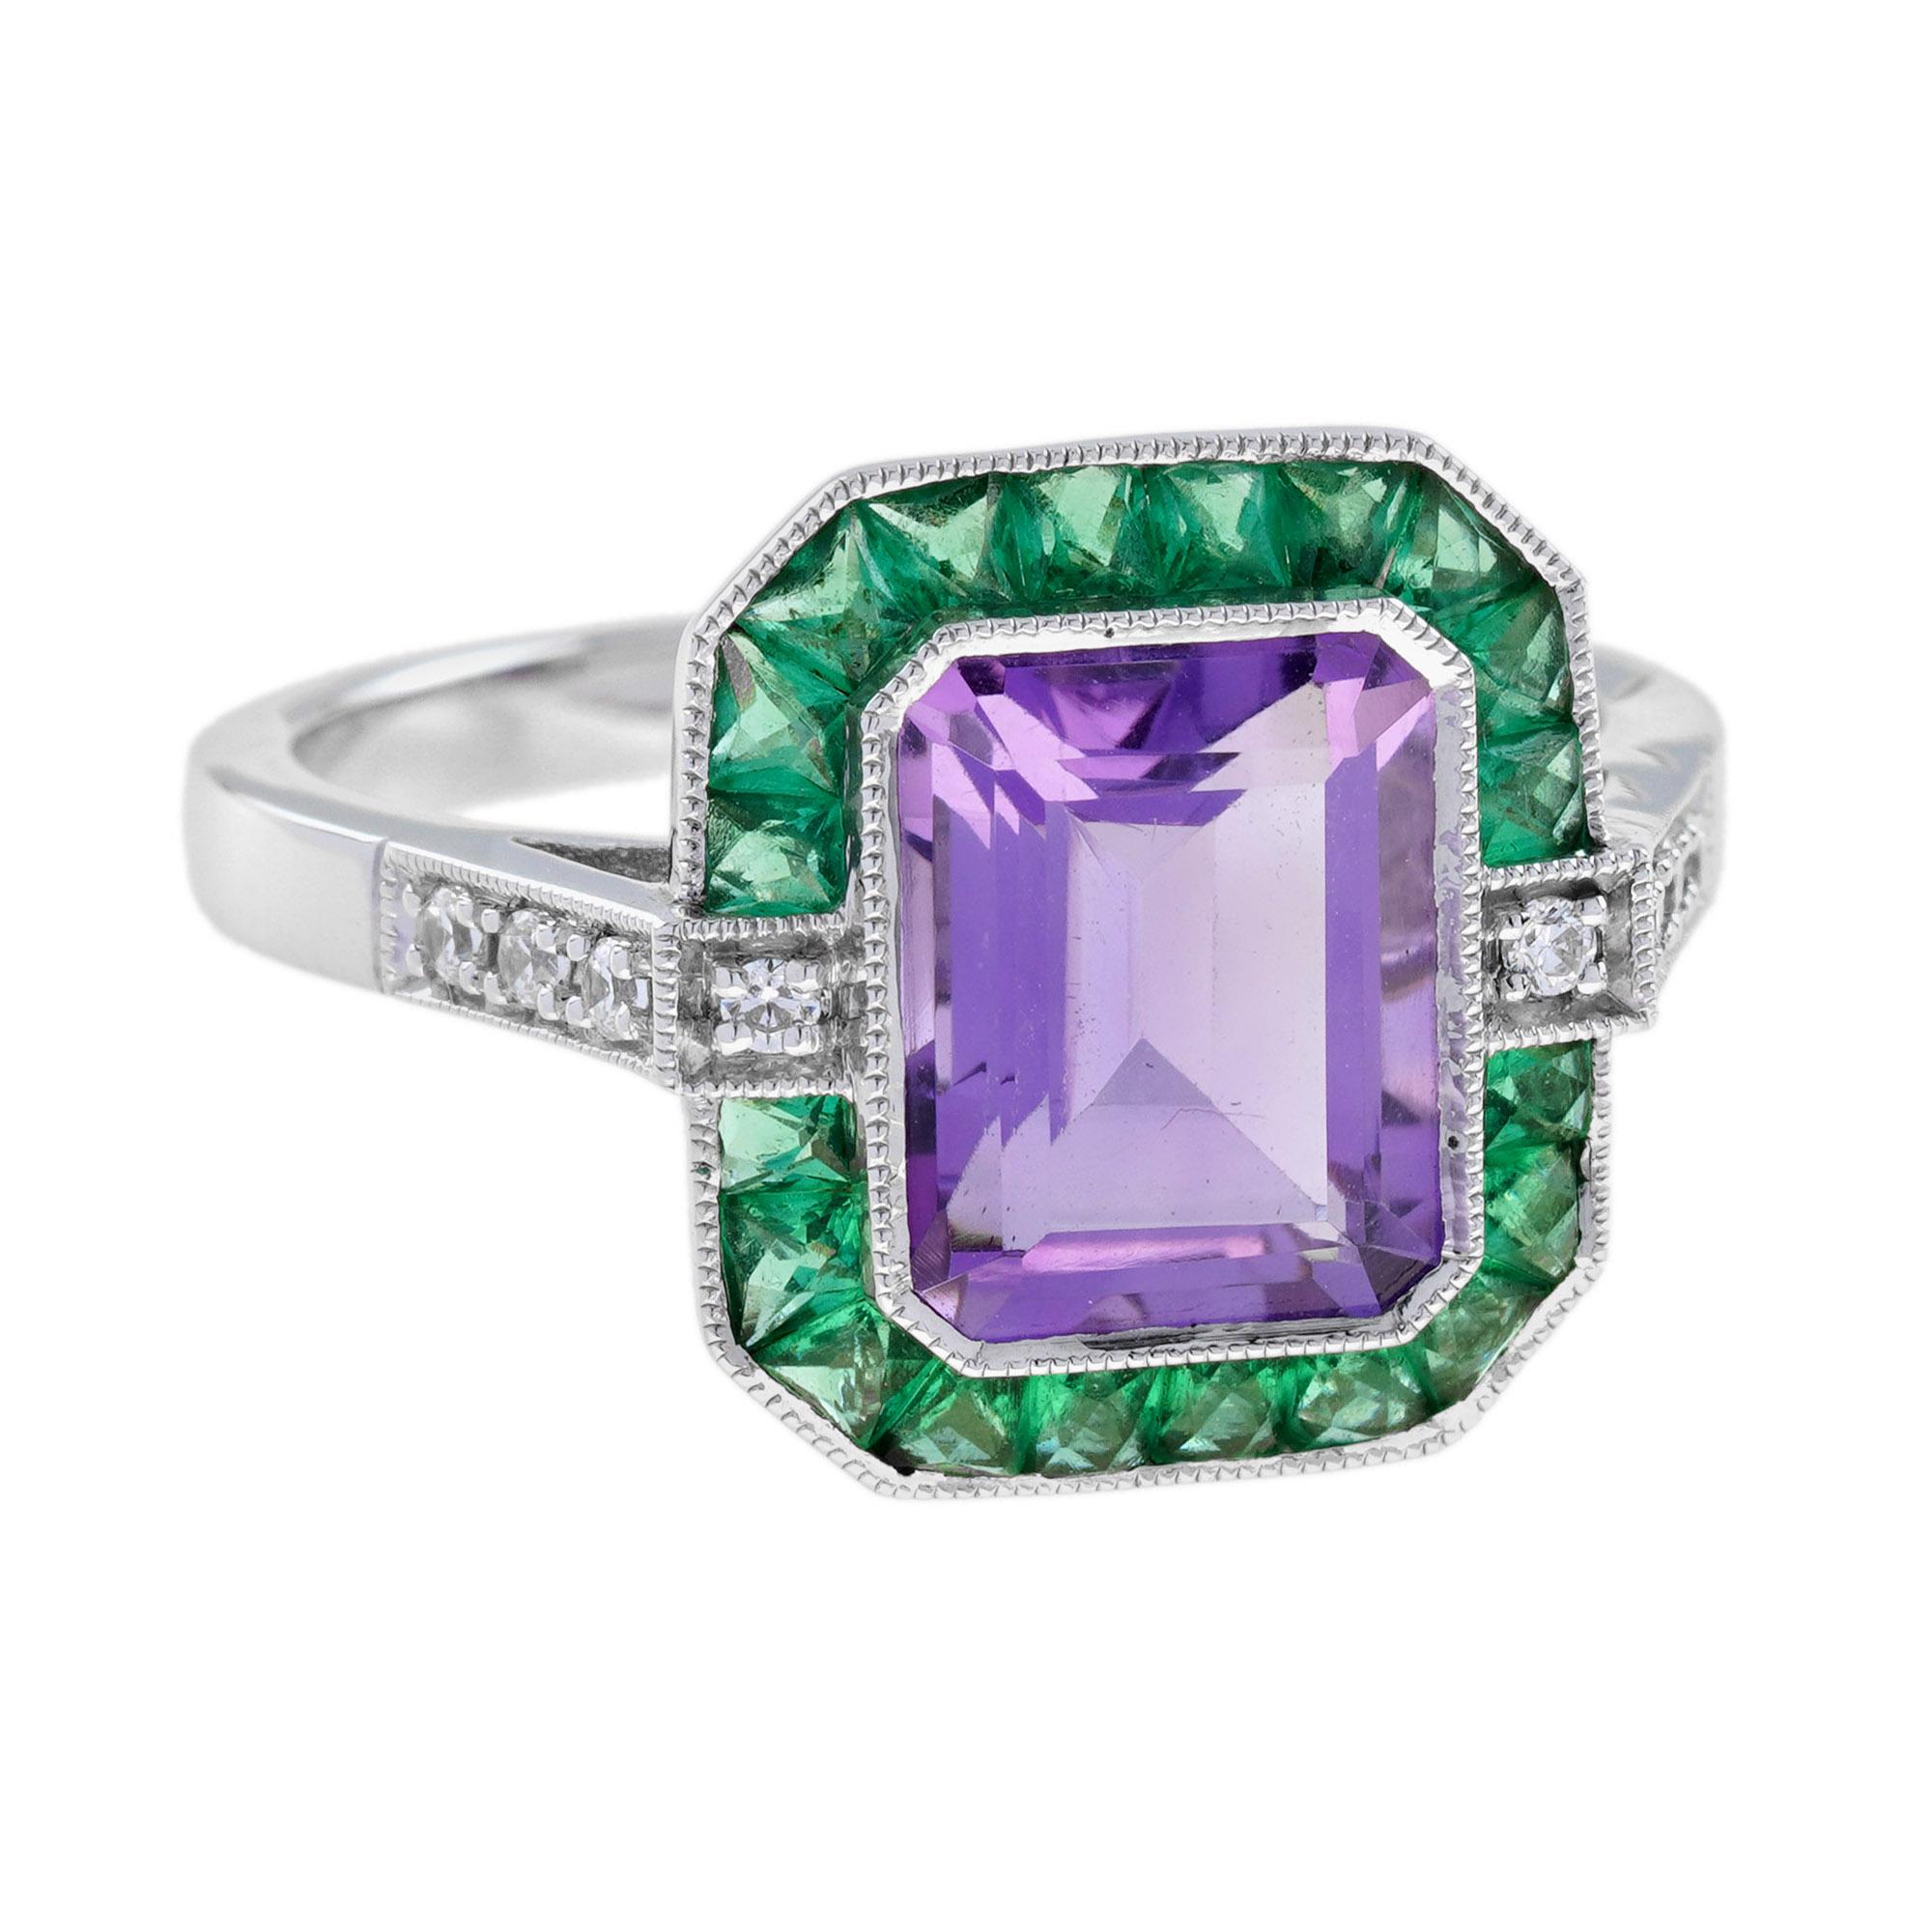 For Sale:  Emerald Cut Amethyst Emerald and Diamond Art Deco Style Ring in 14K White Gold 3